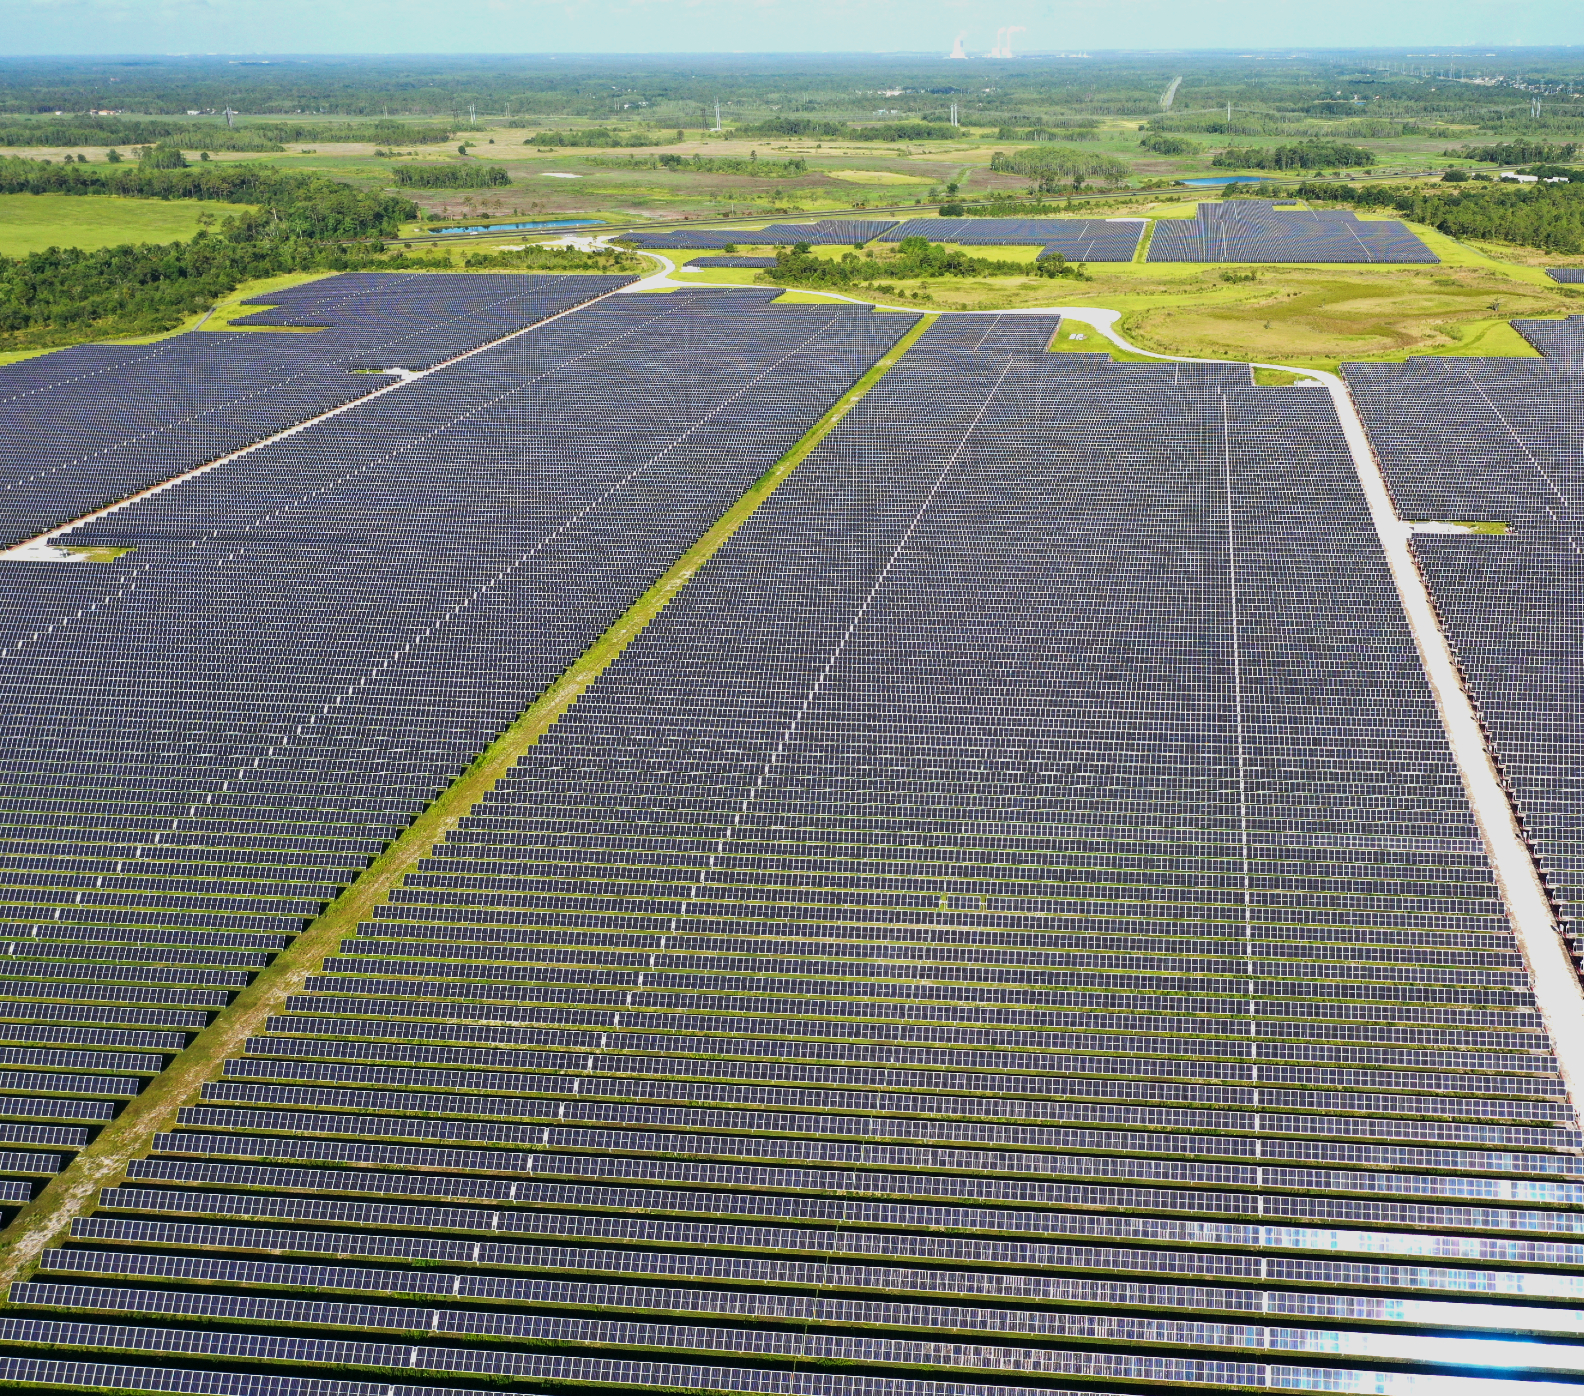 Arial view of solar panels in a green field